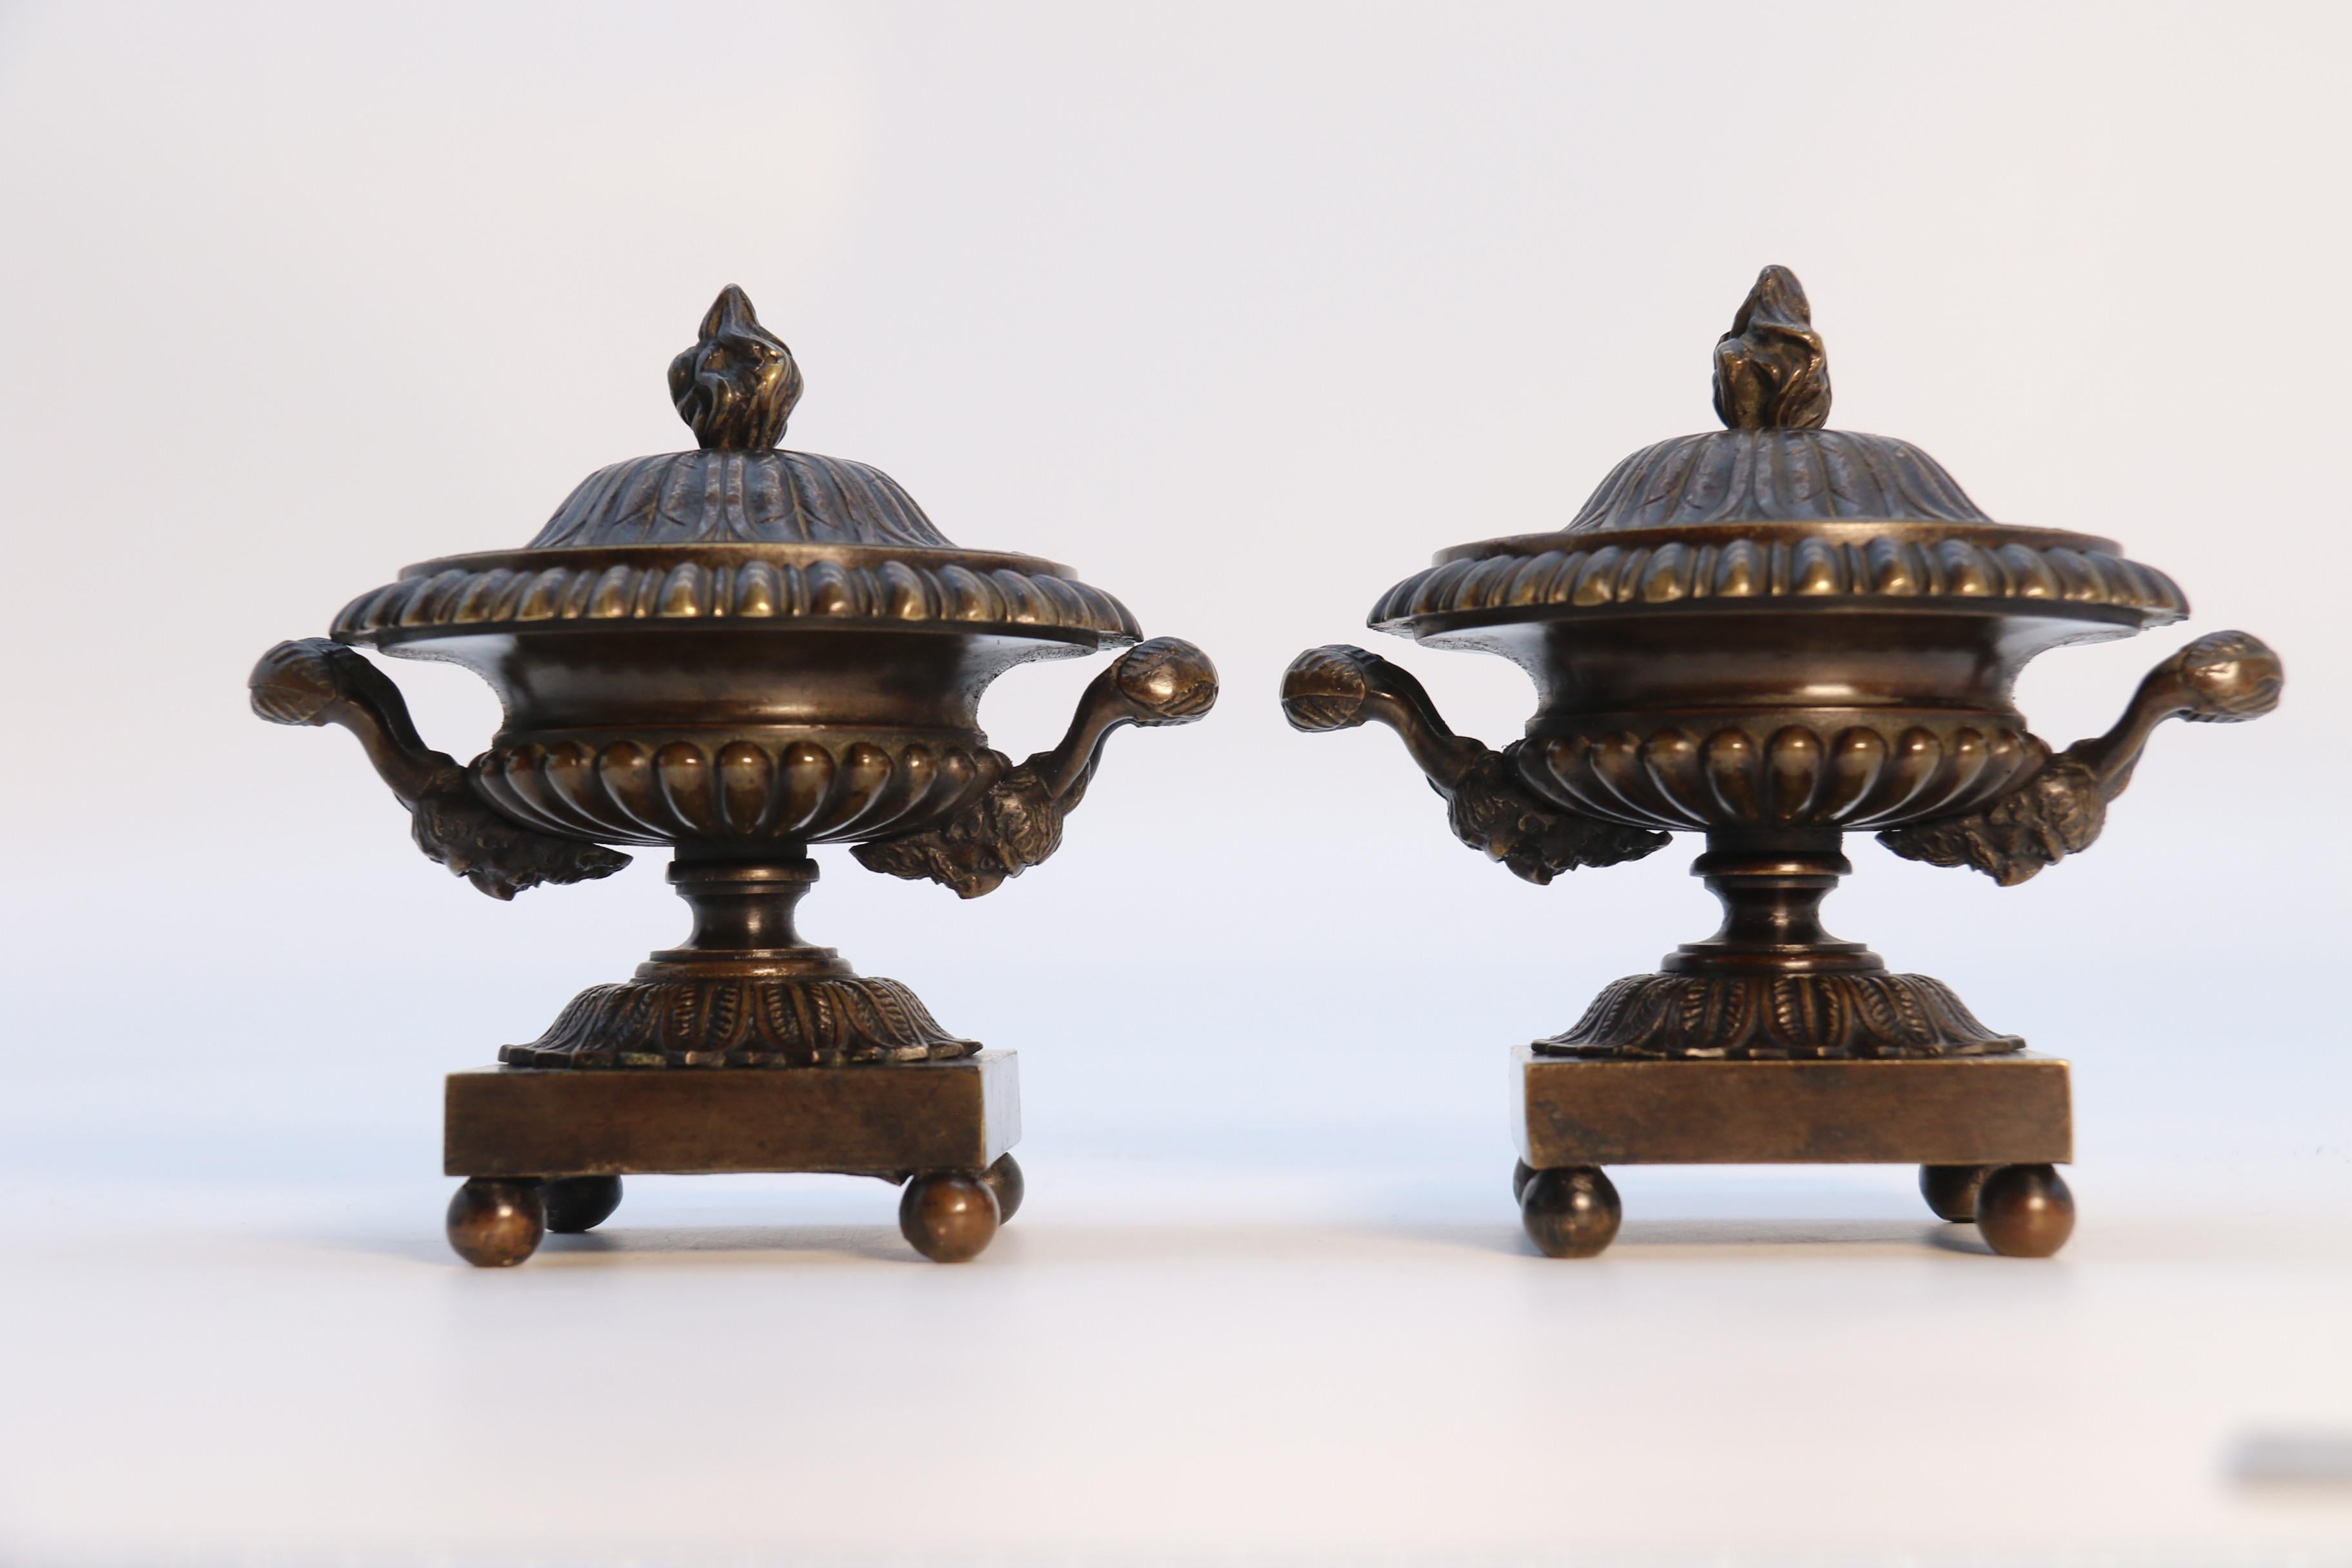 Antique  pair of English Regency period classical bronze urns,  circa 1820 For Sale 5